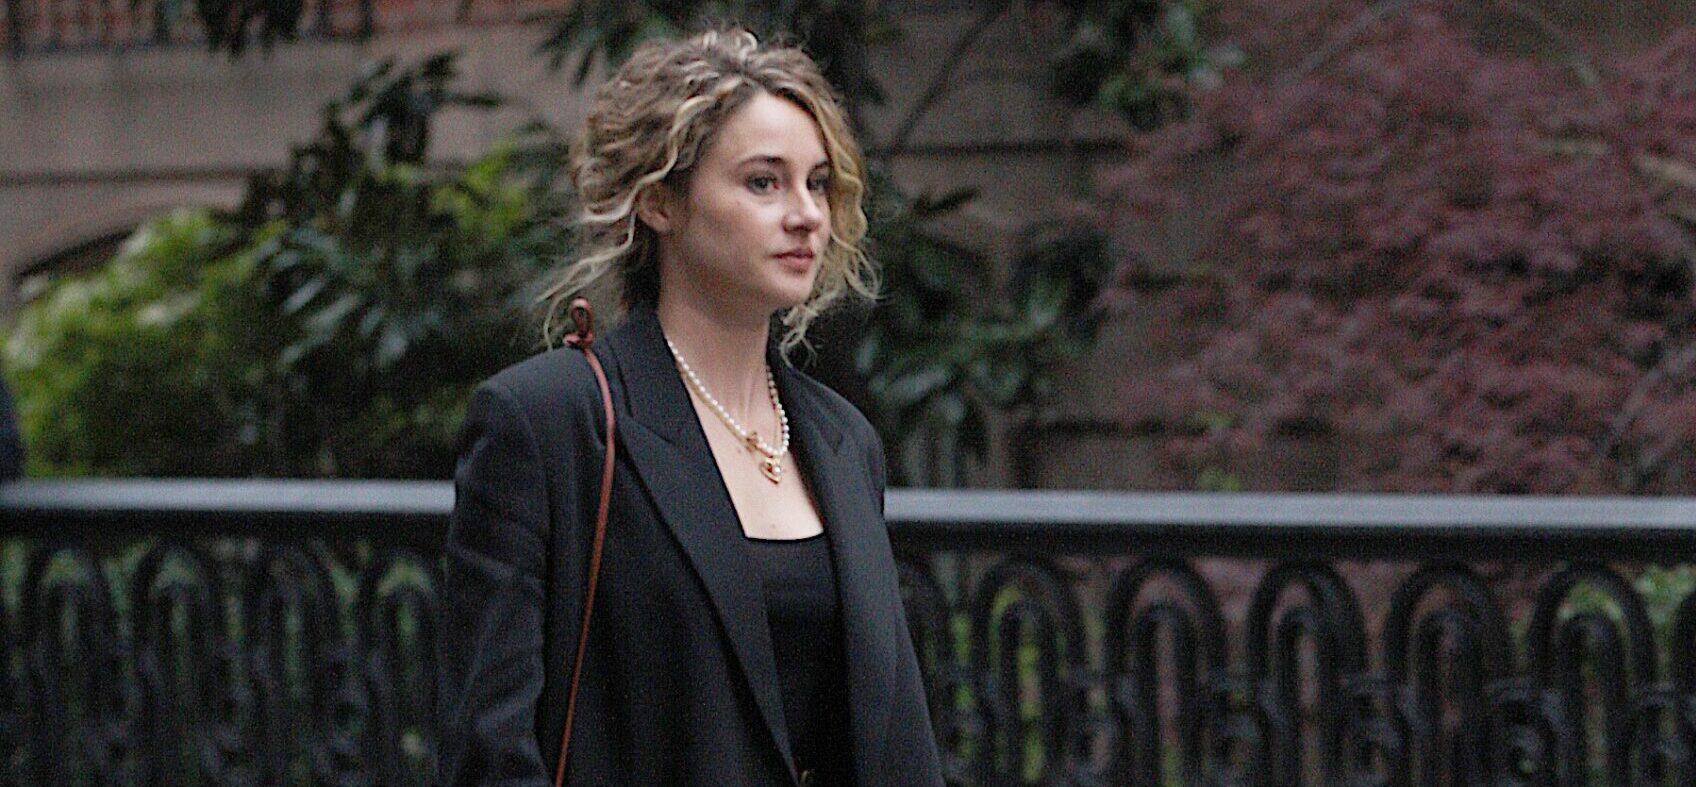 Shailene Woodley was seen on the set of the show named quot Three Women quot in Manhattan NYC